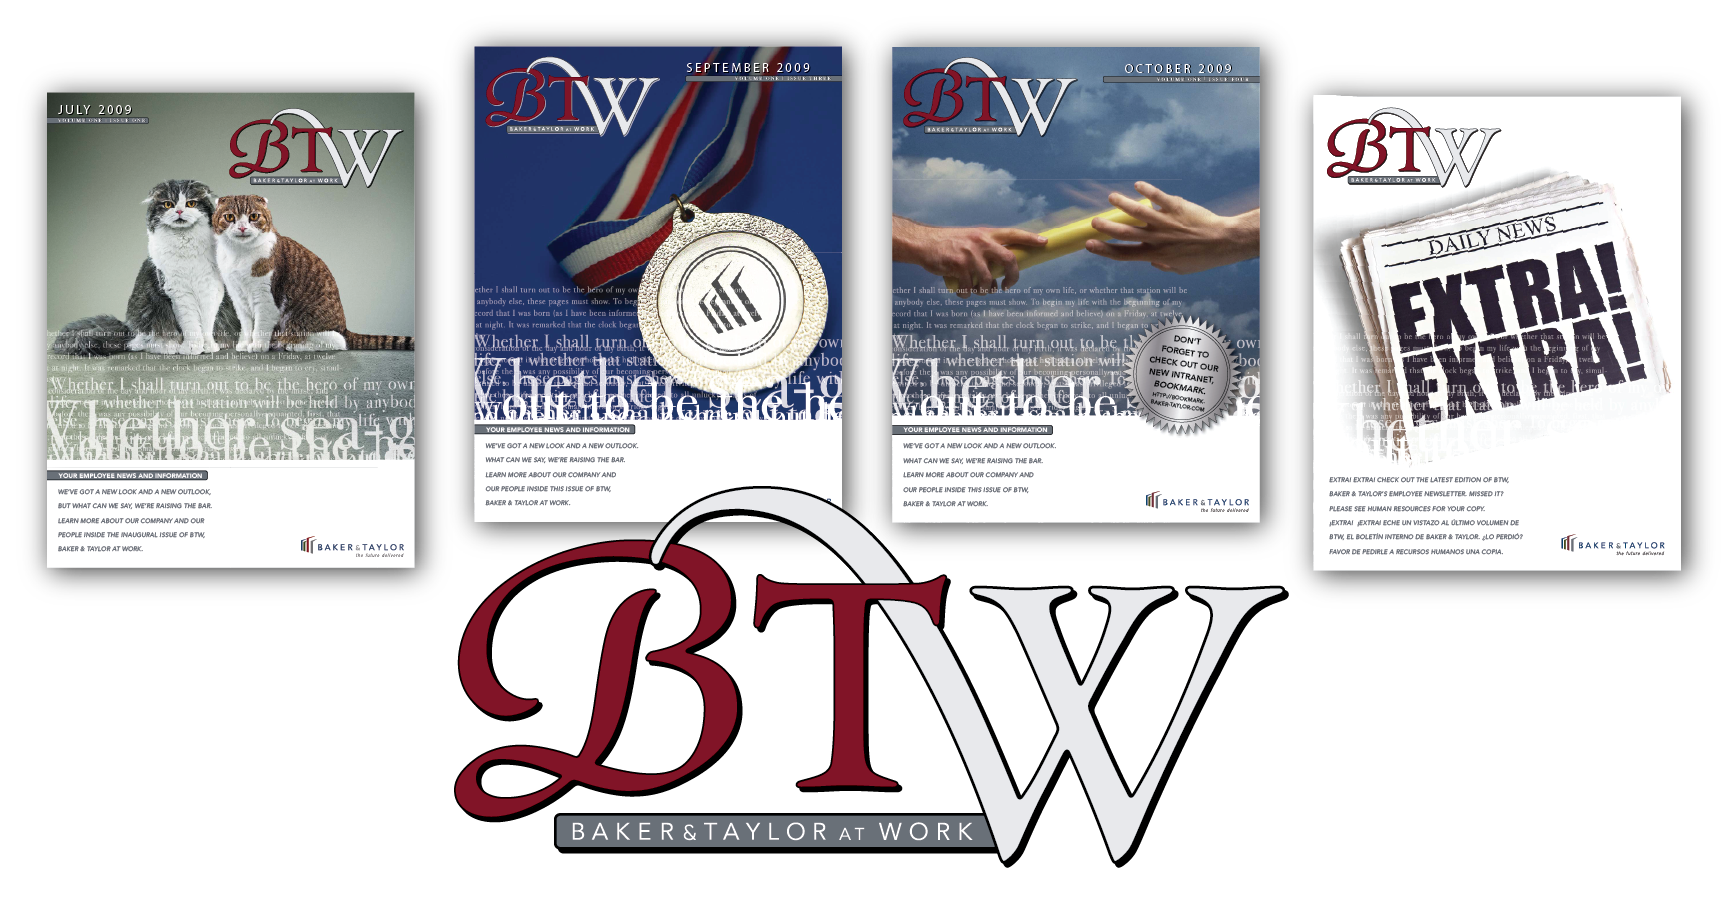 An image of a logo that reads BTW, Baker & Taylor at Work, set in type that references a literary or editorial style, with four samples of the acompanying newsletter, each depicting a high res image associated with the company or its values overlaid with random samples of literary text for a visual effect